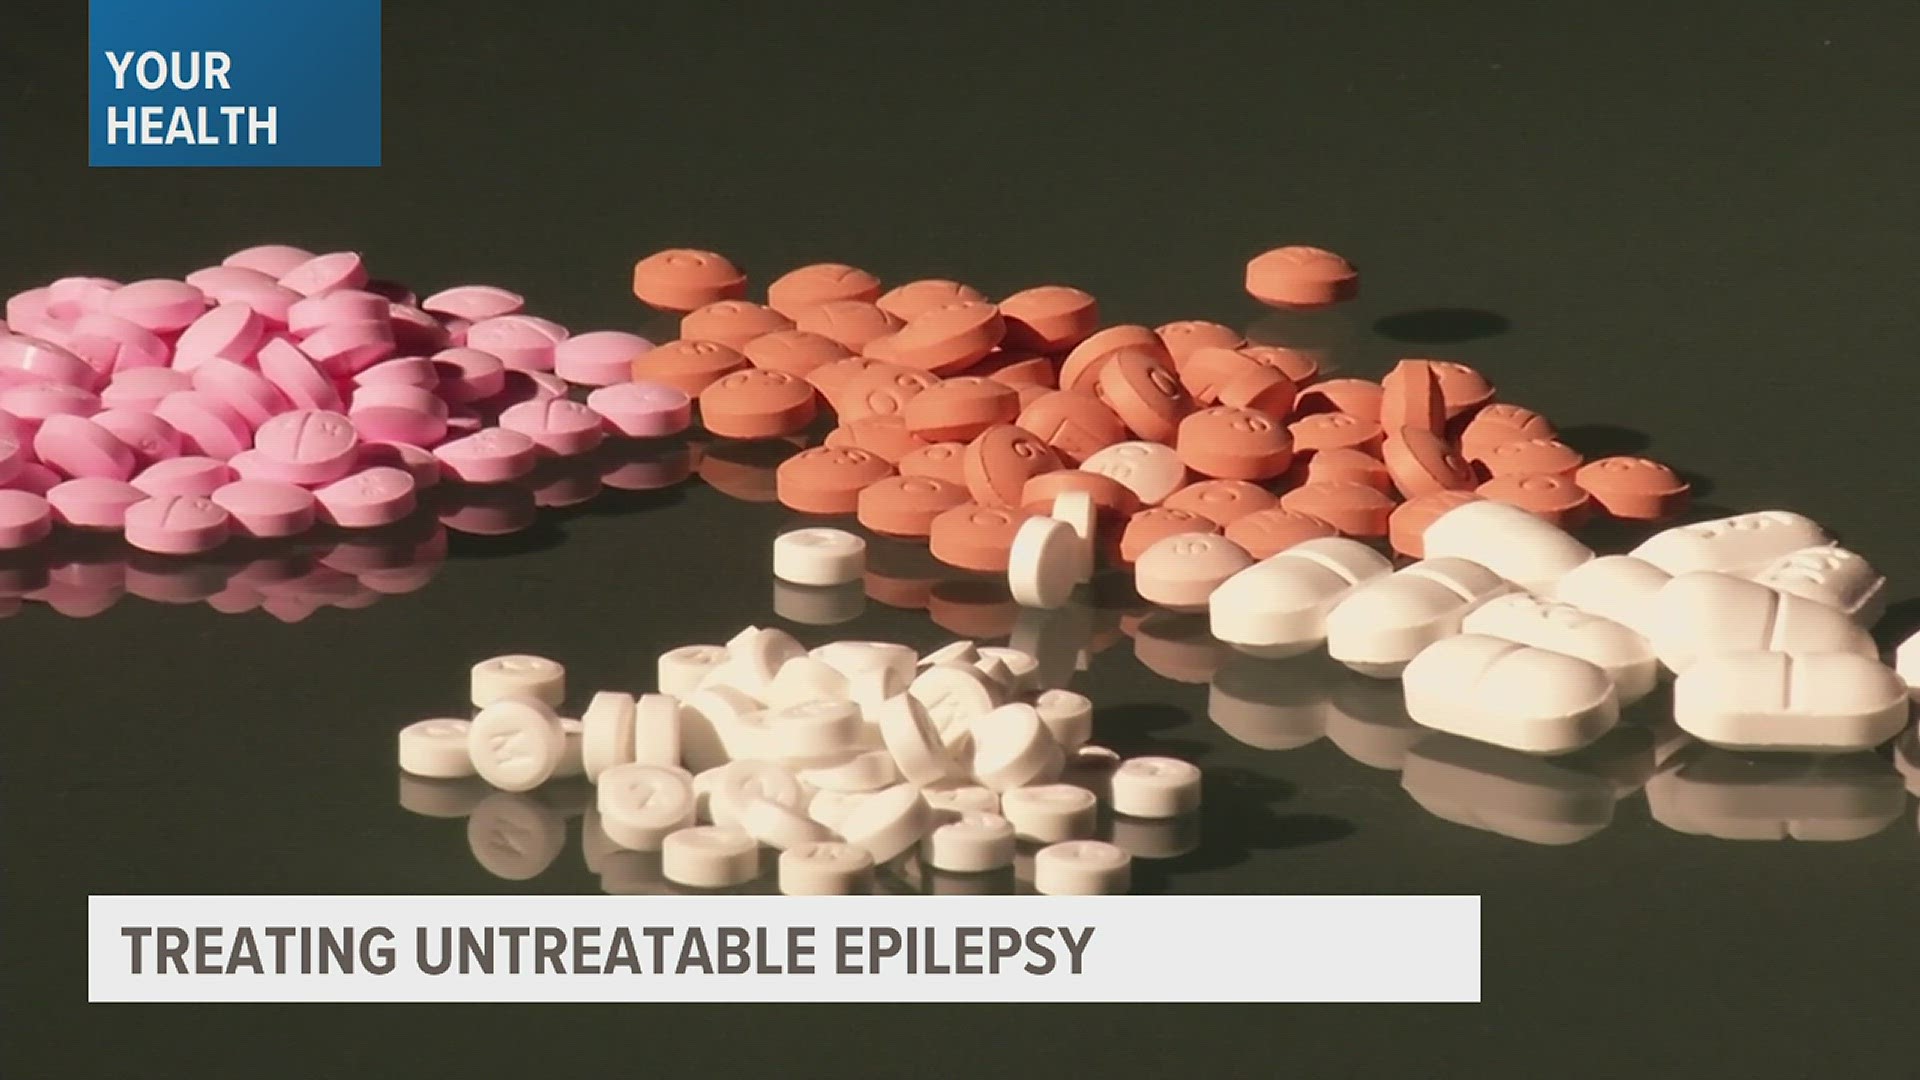 3.4 million people are diagnosed with epilepsy in the US, but one scientific study shows there are new treatments that can help limit or erase epileptic episodes.